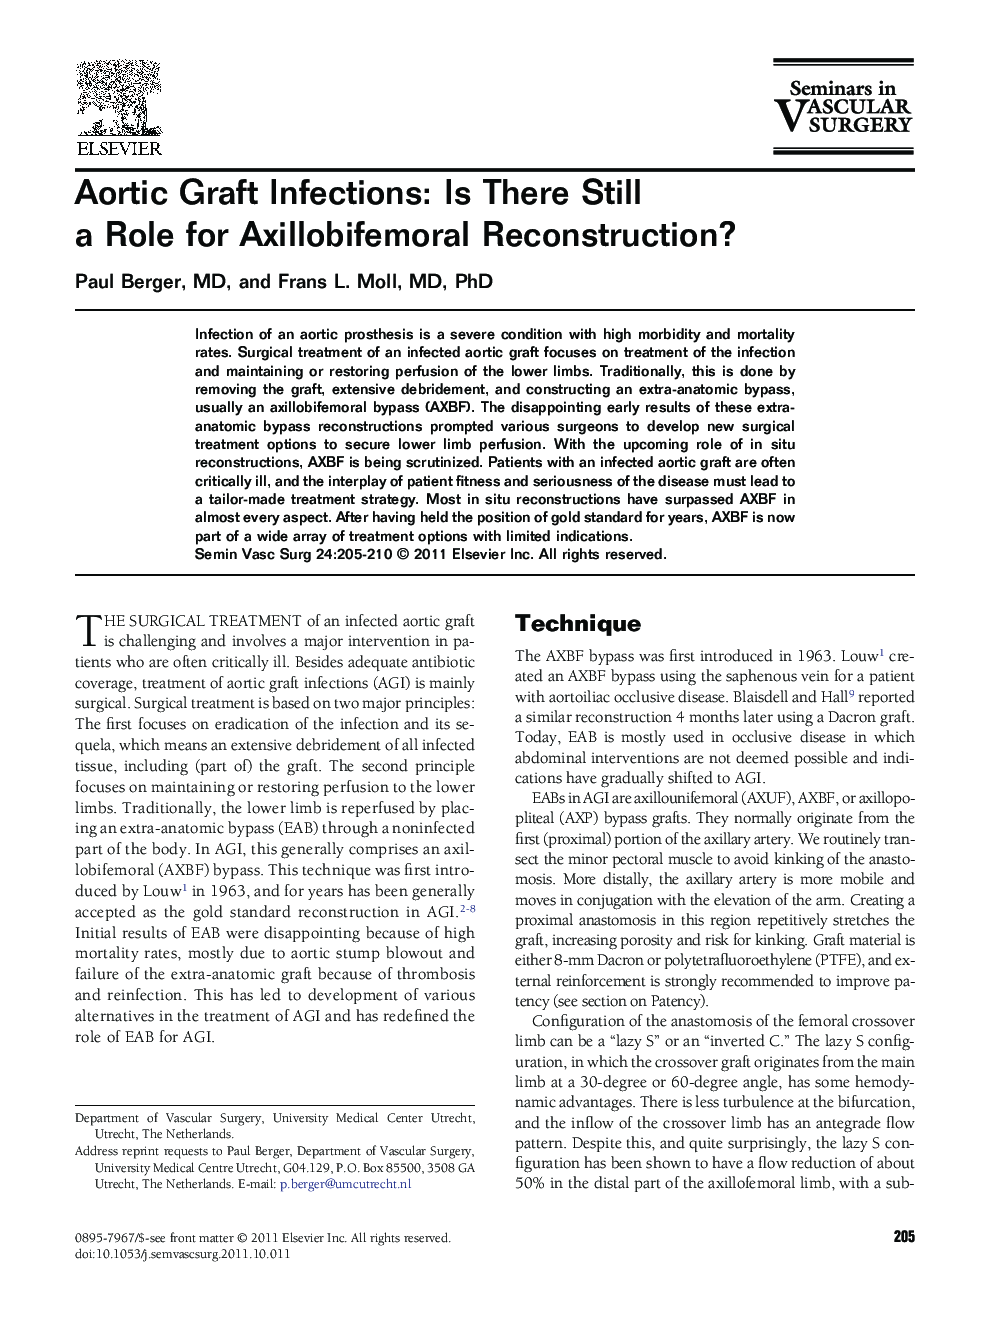 Aortic Graft Infections: Is There Still a Role for Axillobifemoral Reconstruction?